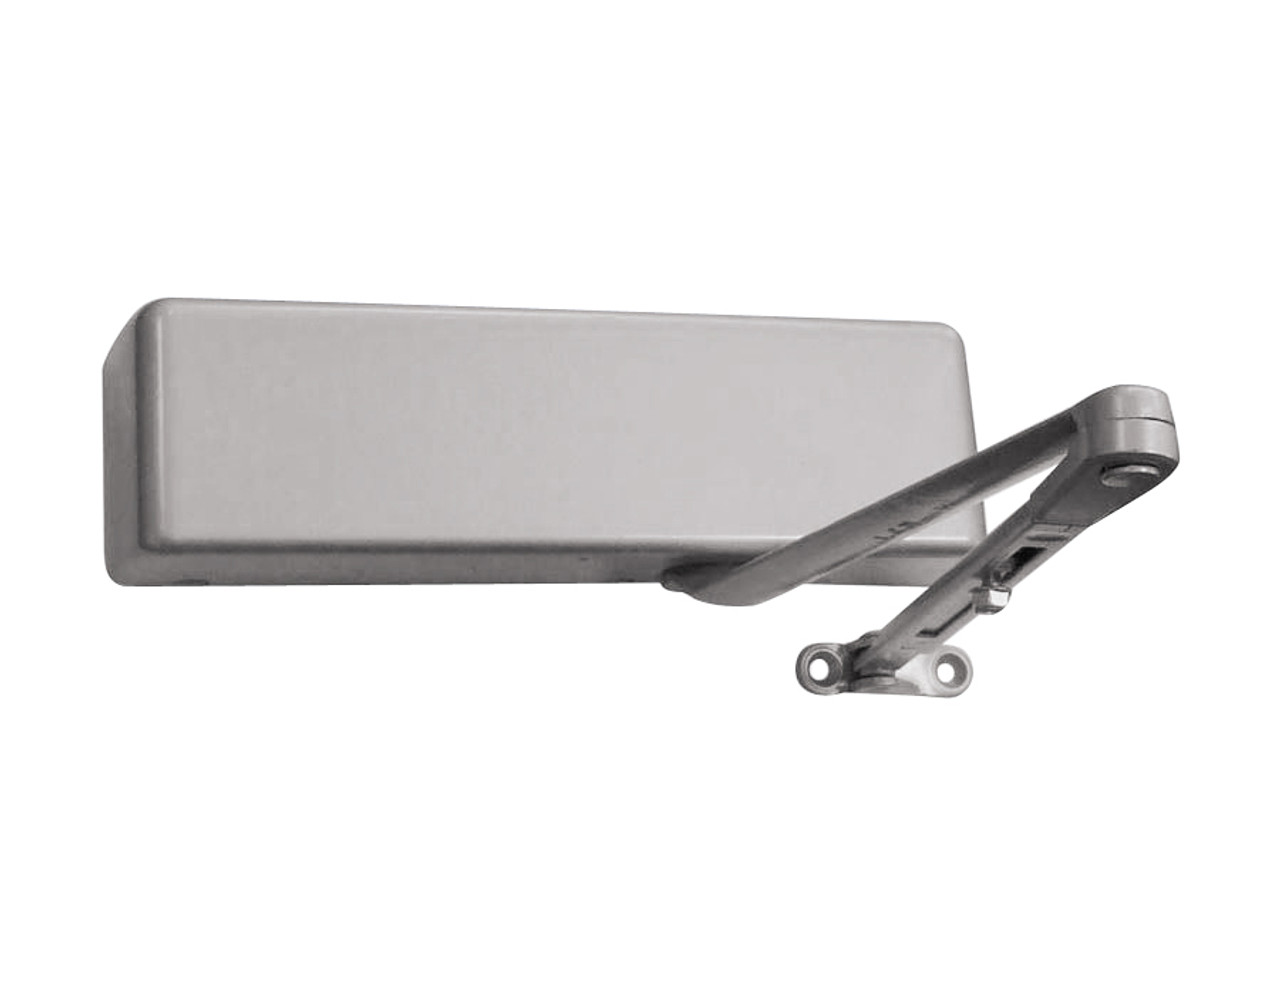 4021-H-RH-US15 LCN Door Closer with Hold Open Arm in Satin Nickel Finish